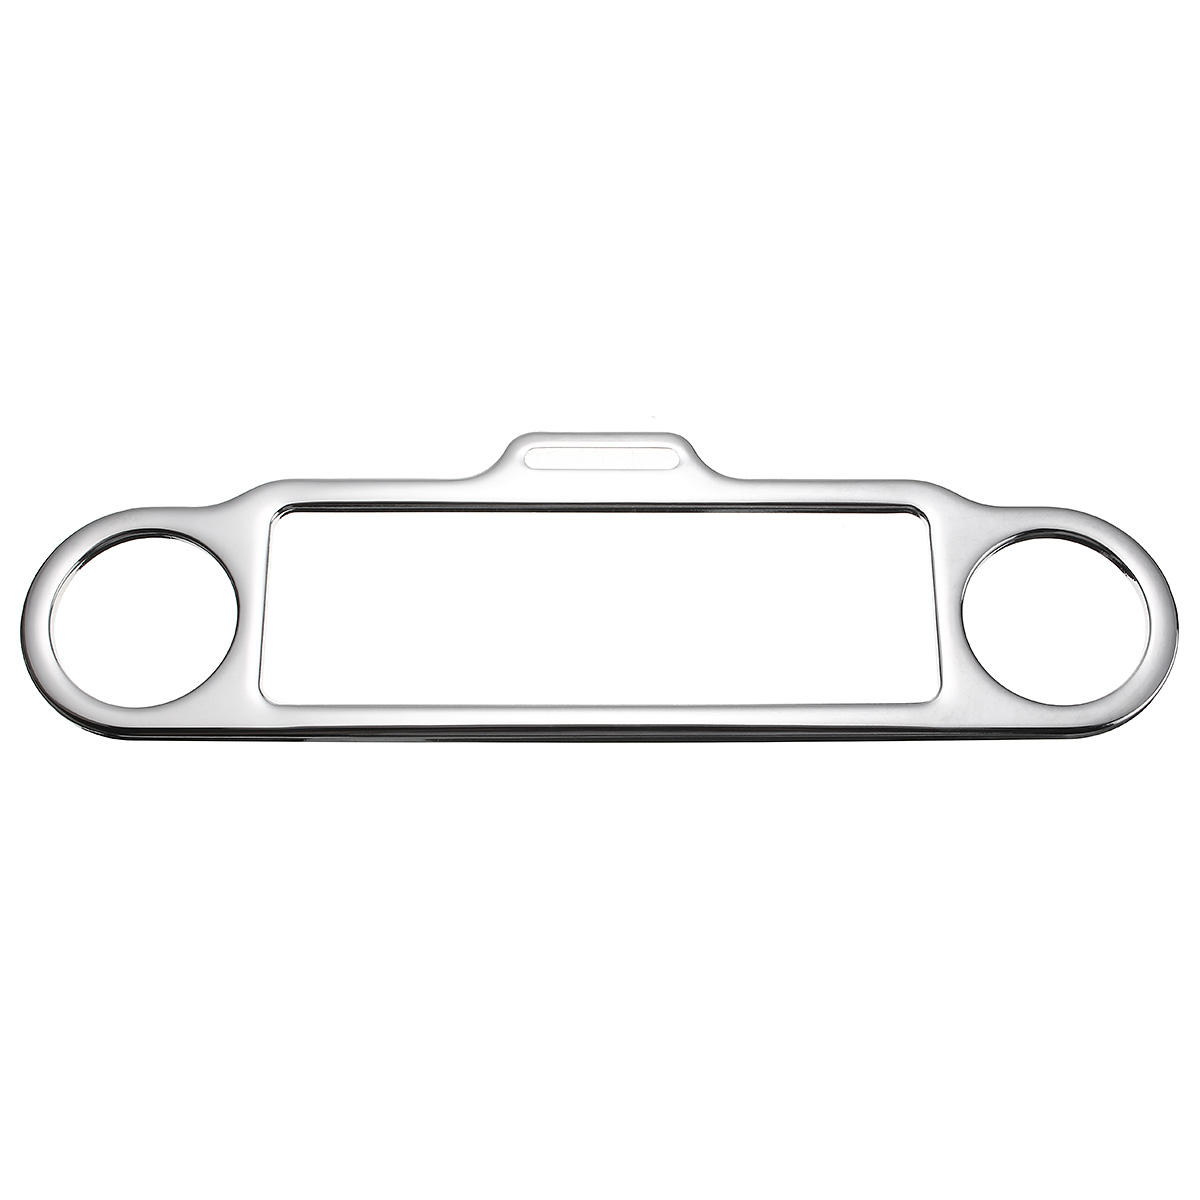 Trim Ring Stereo Accent Cover Voor Harley Davidson Electra Street Glide Touring Chrome